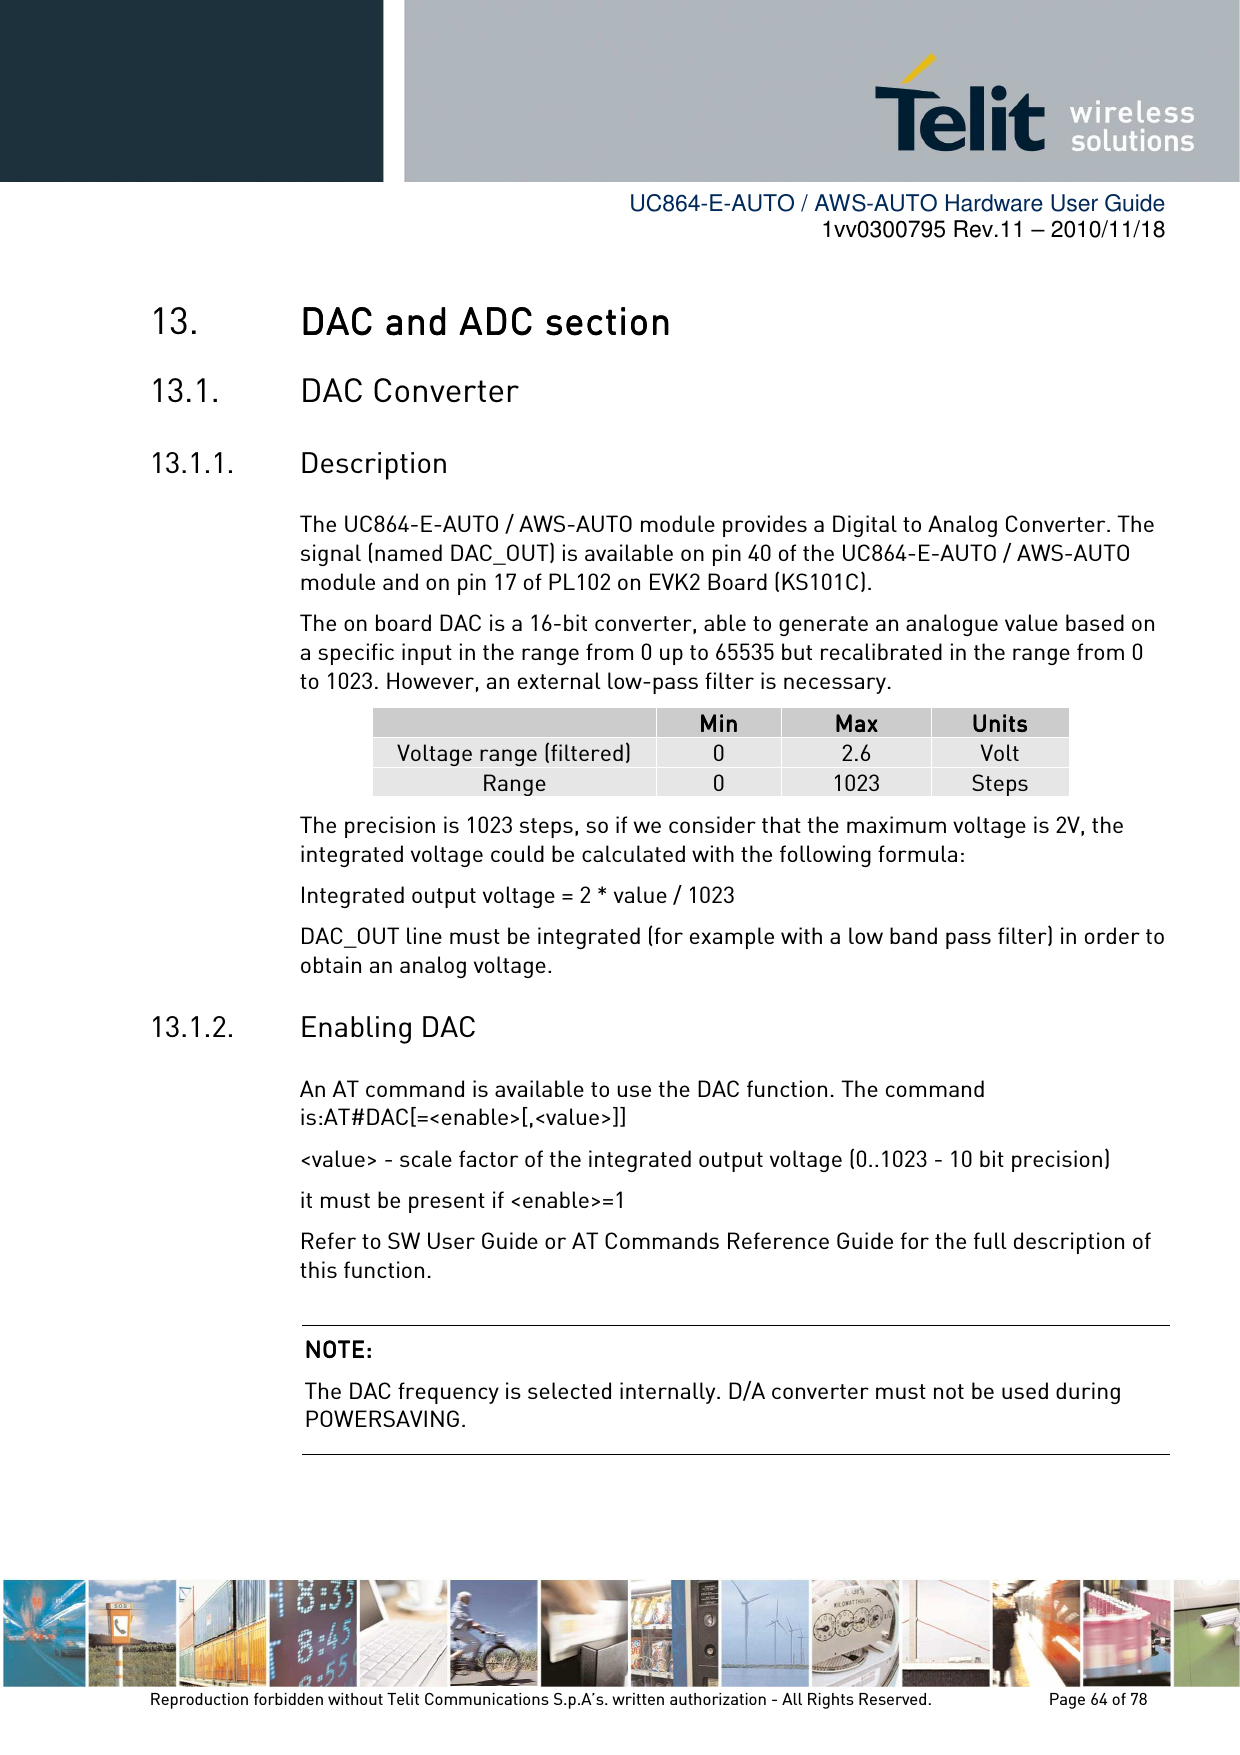        UC864-E-AUTO / AWS-AUTO Hardware User Guide 1vv0300795 Rev.11 – 2010/11/18     Reproduction forbidden without Telit Communications S.p.A’s. written authorization - All Rights Reserved.    Page 64 of 78  13. DAC and ADC sectionDAC and ADC sectionDAC and ADC sectionDAC and ADC section    13.1. DAC Converter 13.1.1. Description The UC864-E-AUTO / AWS-AUTO module provides a Digital to Analog Converter. The signal (named DAC_OUT) is available on pin 40 of the UC864-E-AUTO / AWS-AUTO module and on pin 17 of PL102 on EVK2 Board (KS101C). The on board DAC is a 16-bit converter, able to generate an analogue value based on a specific input in the range from 0 up to 65535 but recalibrated in the range from 0 to 1023. However, an external low-pass filter is necessary.   MinMinMinMin     MaxMaxMaxMax     UnitsUnitsUnitsUnits    Voltage range (filtered)  0  2.6  Volt Range  0  1023  Steps The precision is 1023 steps, so if we consider that the maximum voltage is 2V, the integrated voltage could be calculated with the following formula: Integrated output voltage = 2 * value / 1023 DAC_OUT line must be integrated (for example with a low band pass filter) in order to obtain an analog voltage. 13.1.2. Enabling DAC An AT command is available to use the DAC function. The command is:AT#DAC[=&lt;enable&gt;[,&lt;value&gt;]] &lt;value&gt; - scale factor of the integrated output voltage (0..1023 - 10 bit precision) it must be present if &lt;enable&gt;=1 Refer to SW User Guide or AT Commands Reference Guide for the full description of this function.  NOTE: NOTE: NOTE: NOTE:     The DAC frequency is selected internally. D/A converter must not be used during POWERSAVING. 